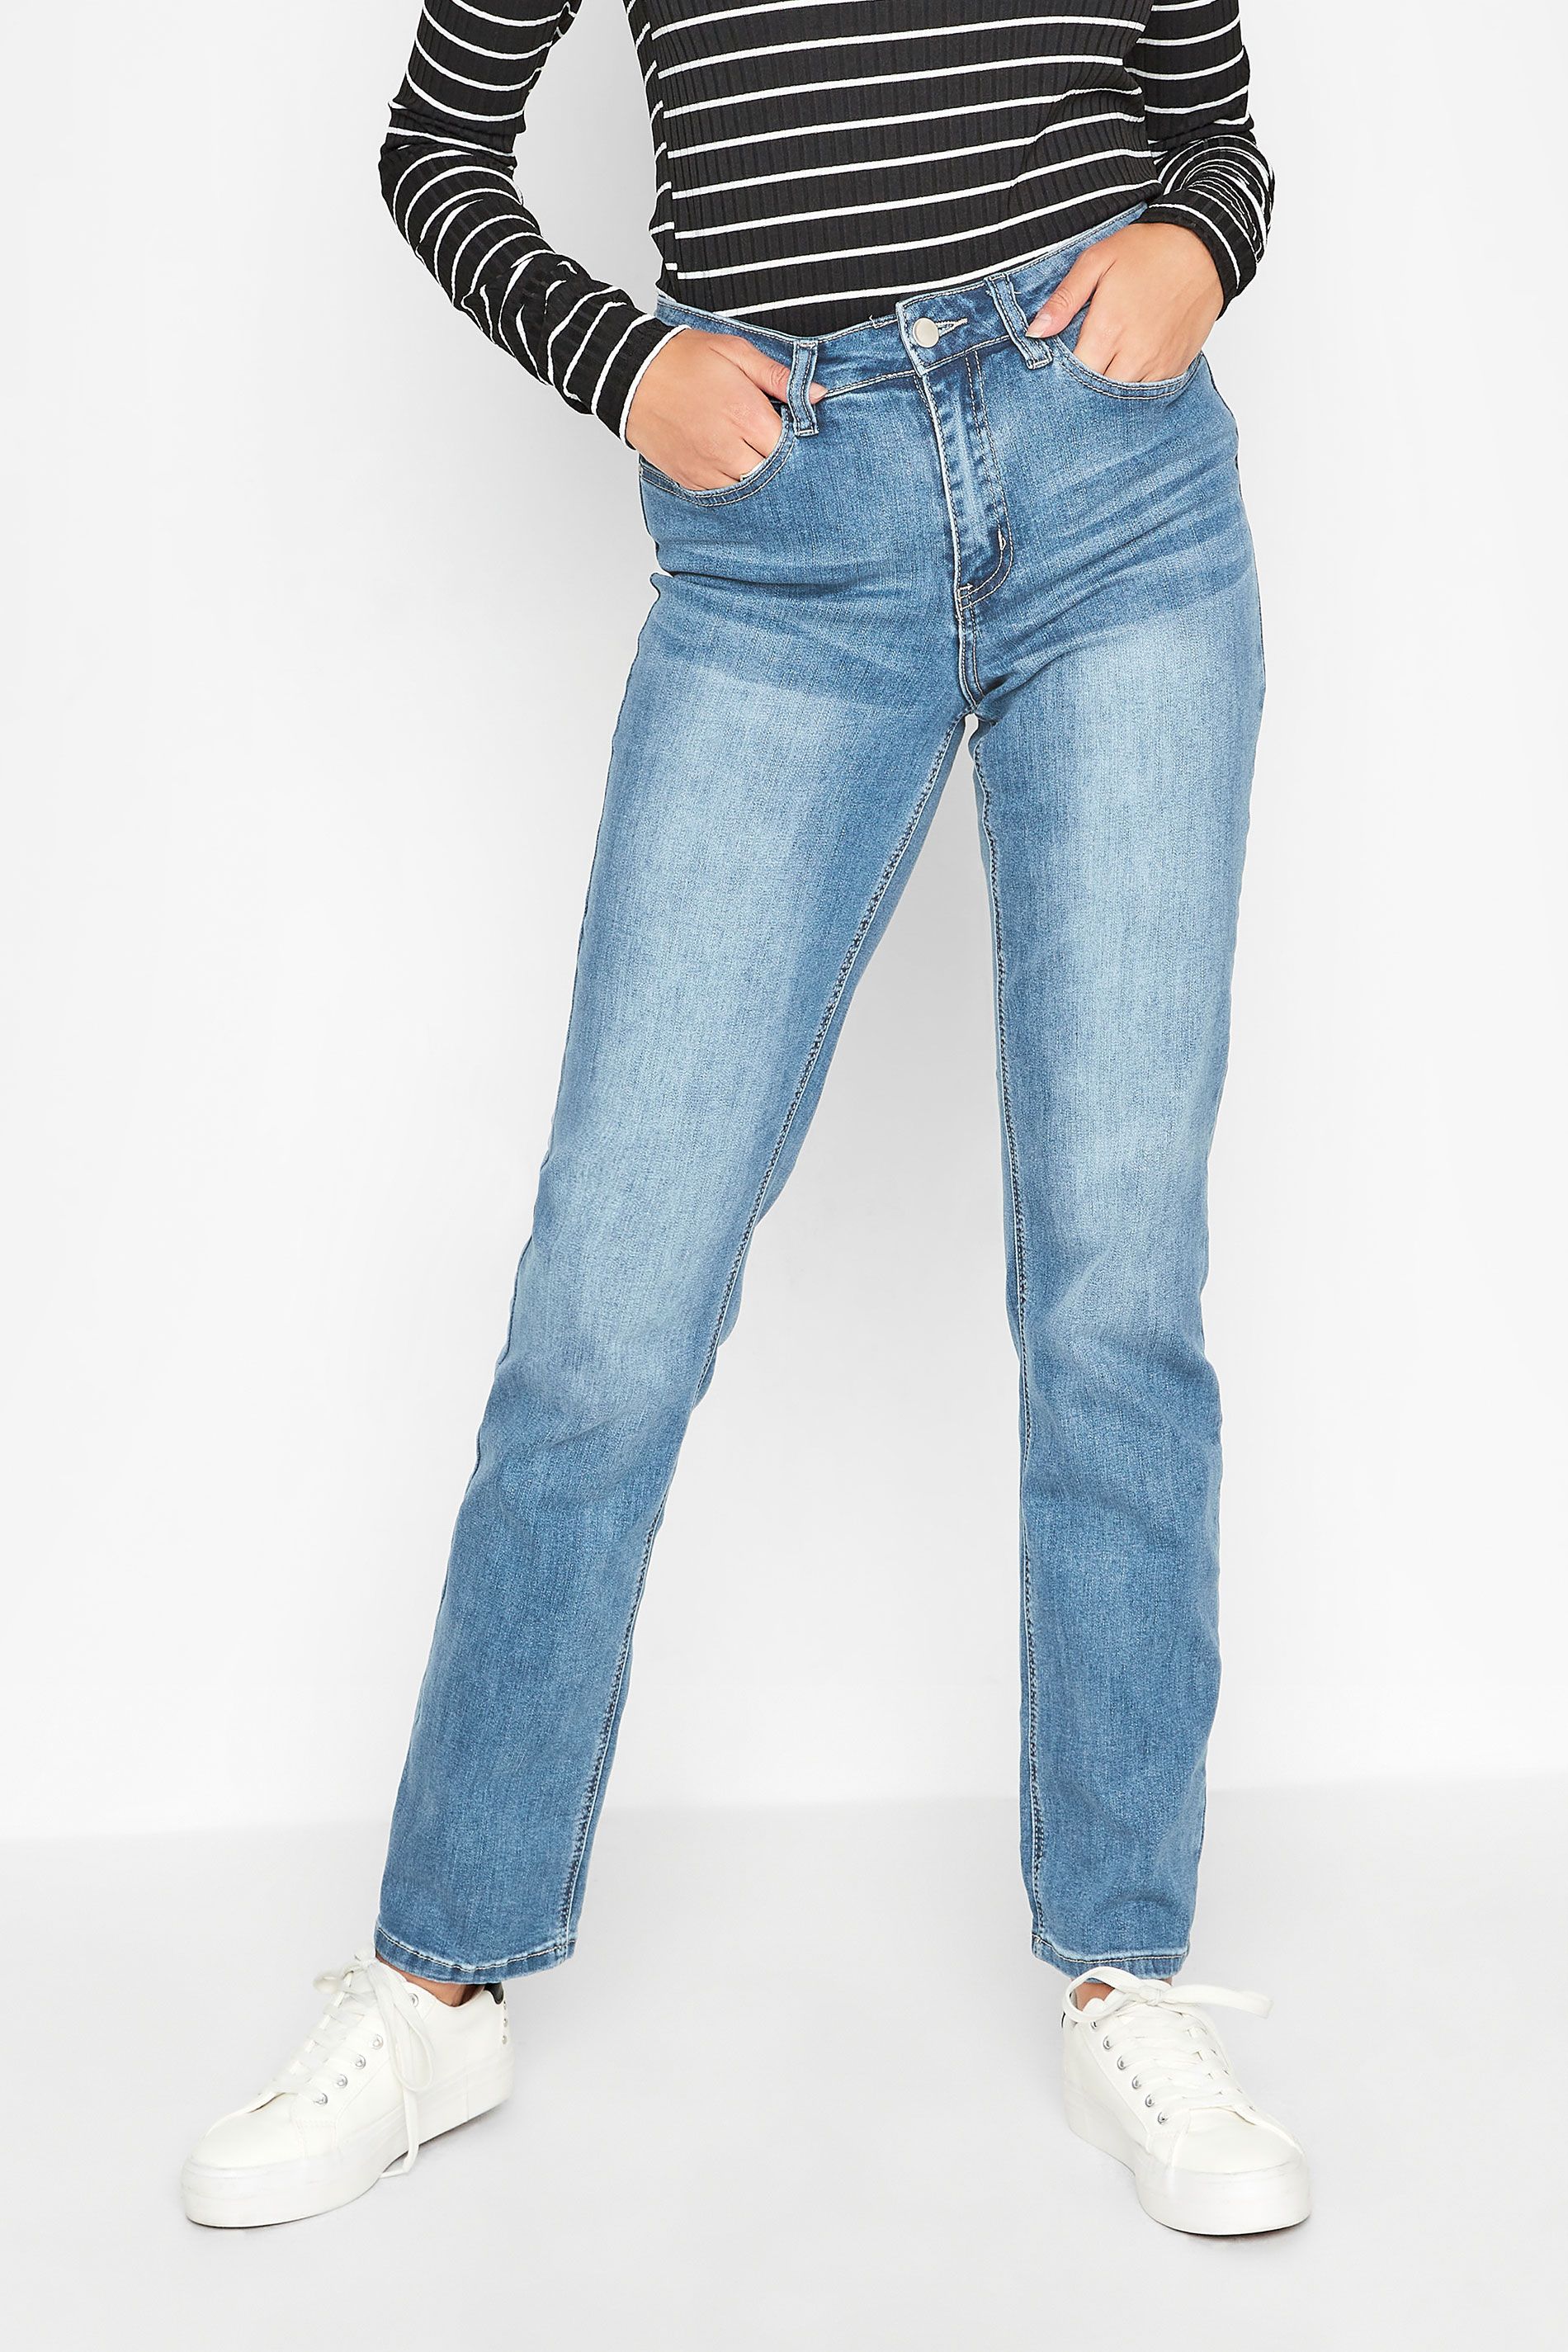 LTS MADE FOR GOOD Tall Blue IVY Stretch Straight Leg Jeans | Long Tall Sally